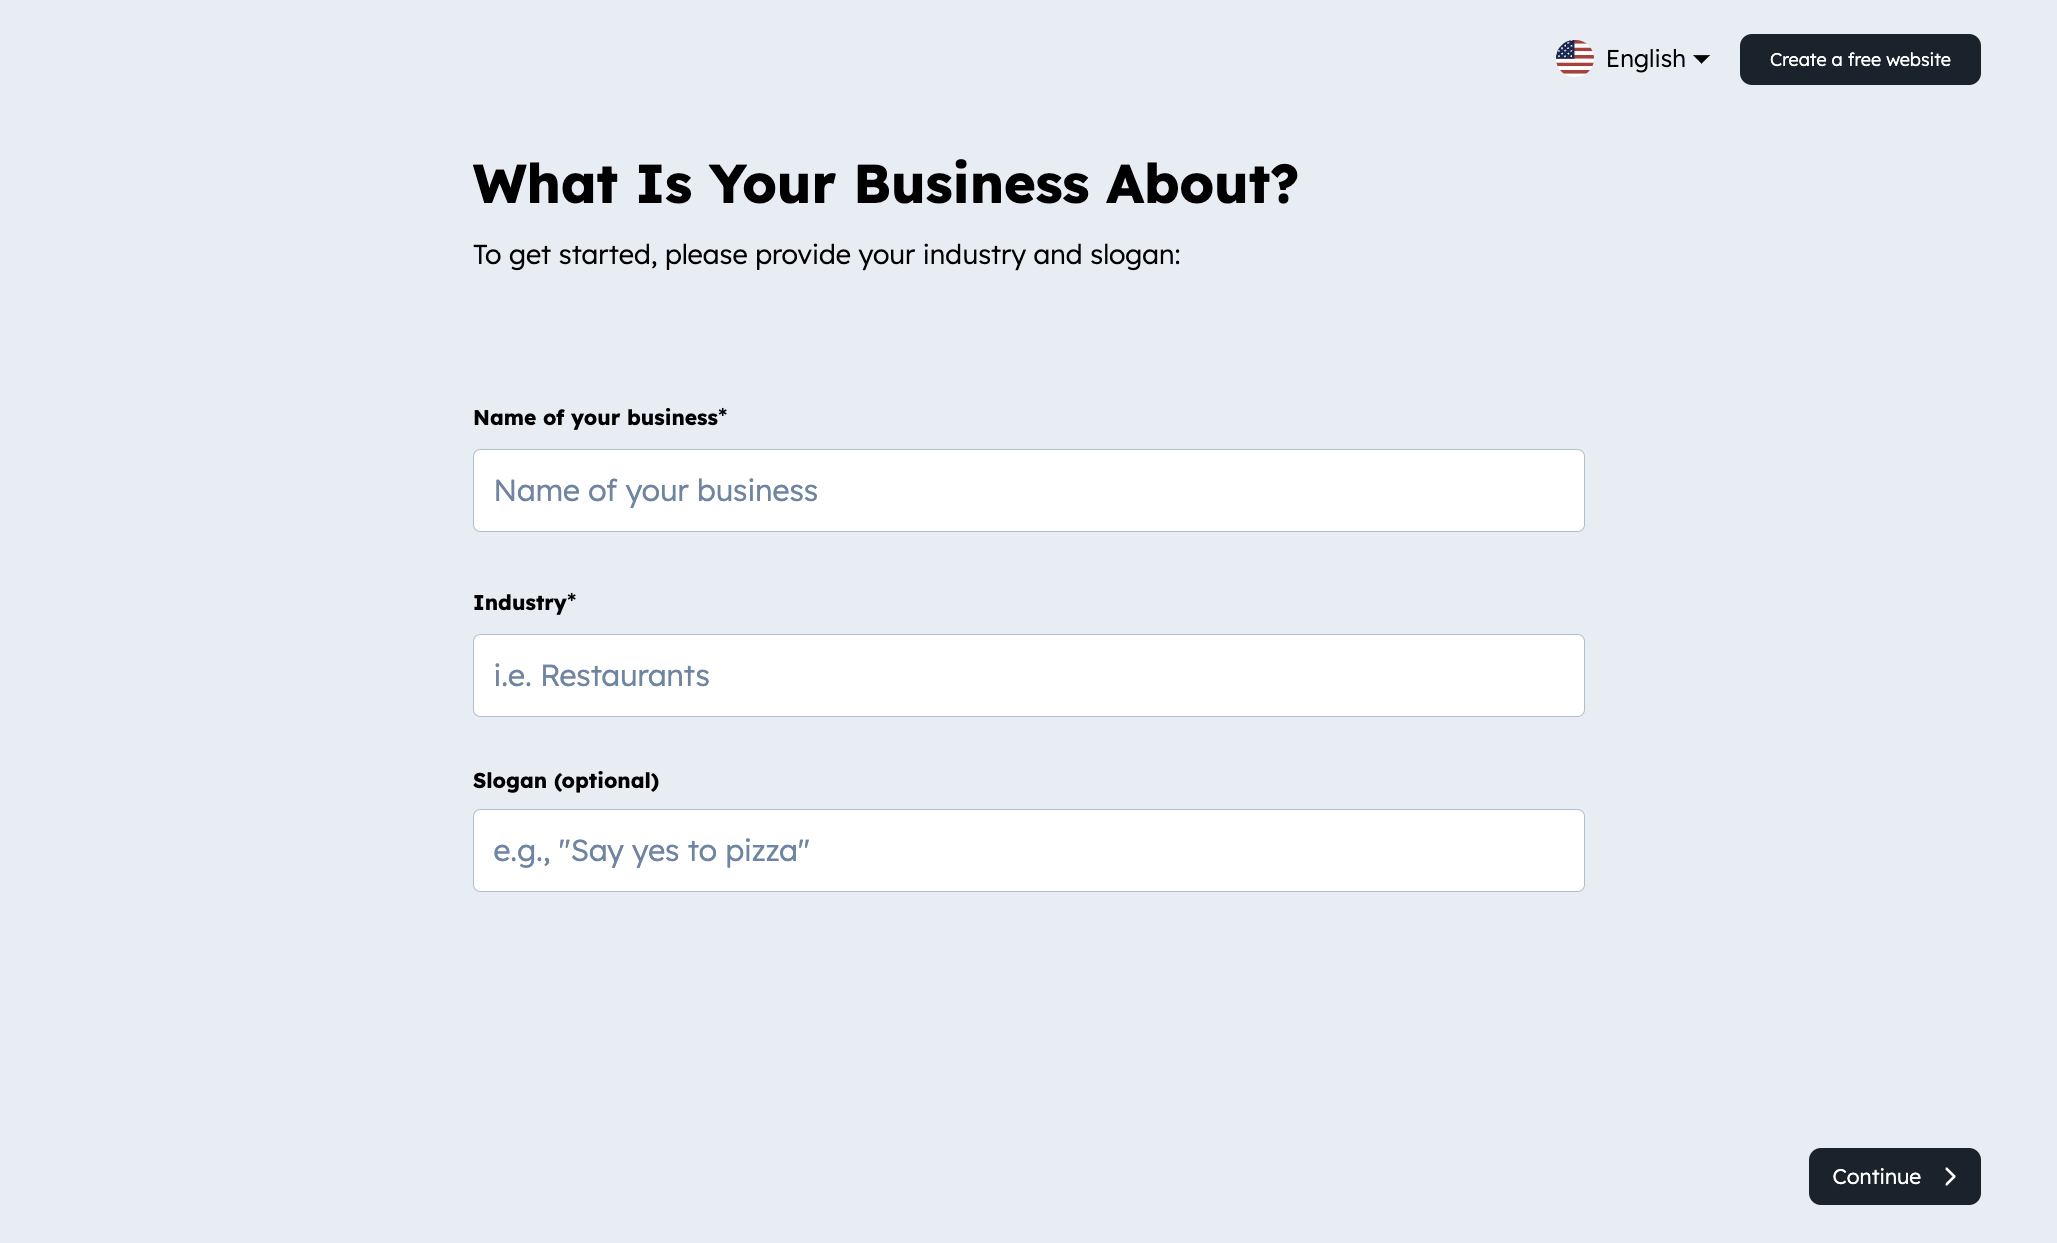 A page to add your business information, which includes the business name, industry, and slogan.